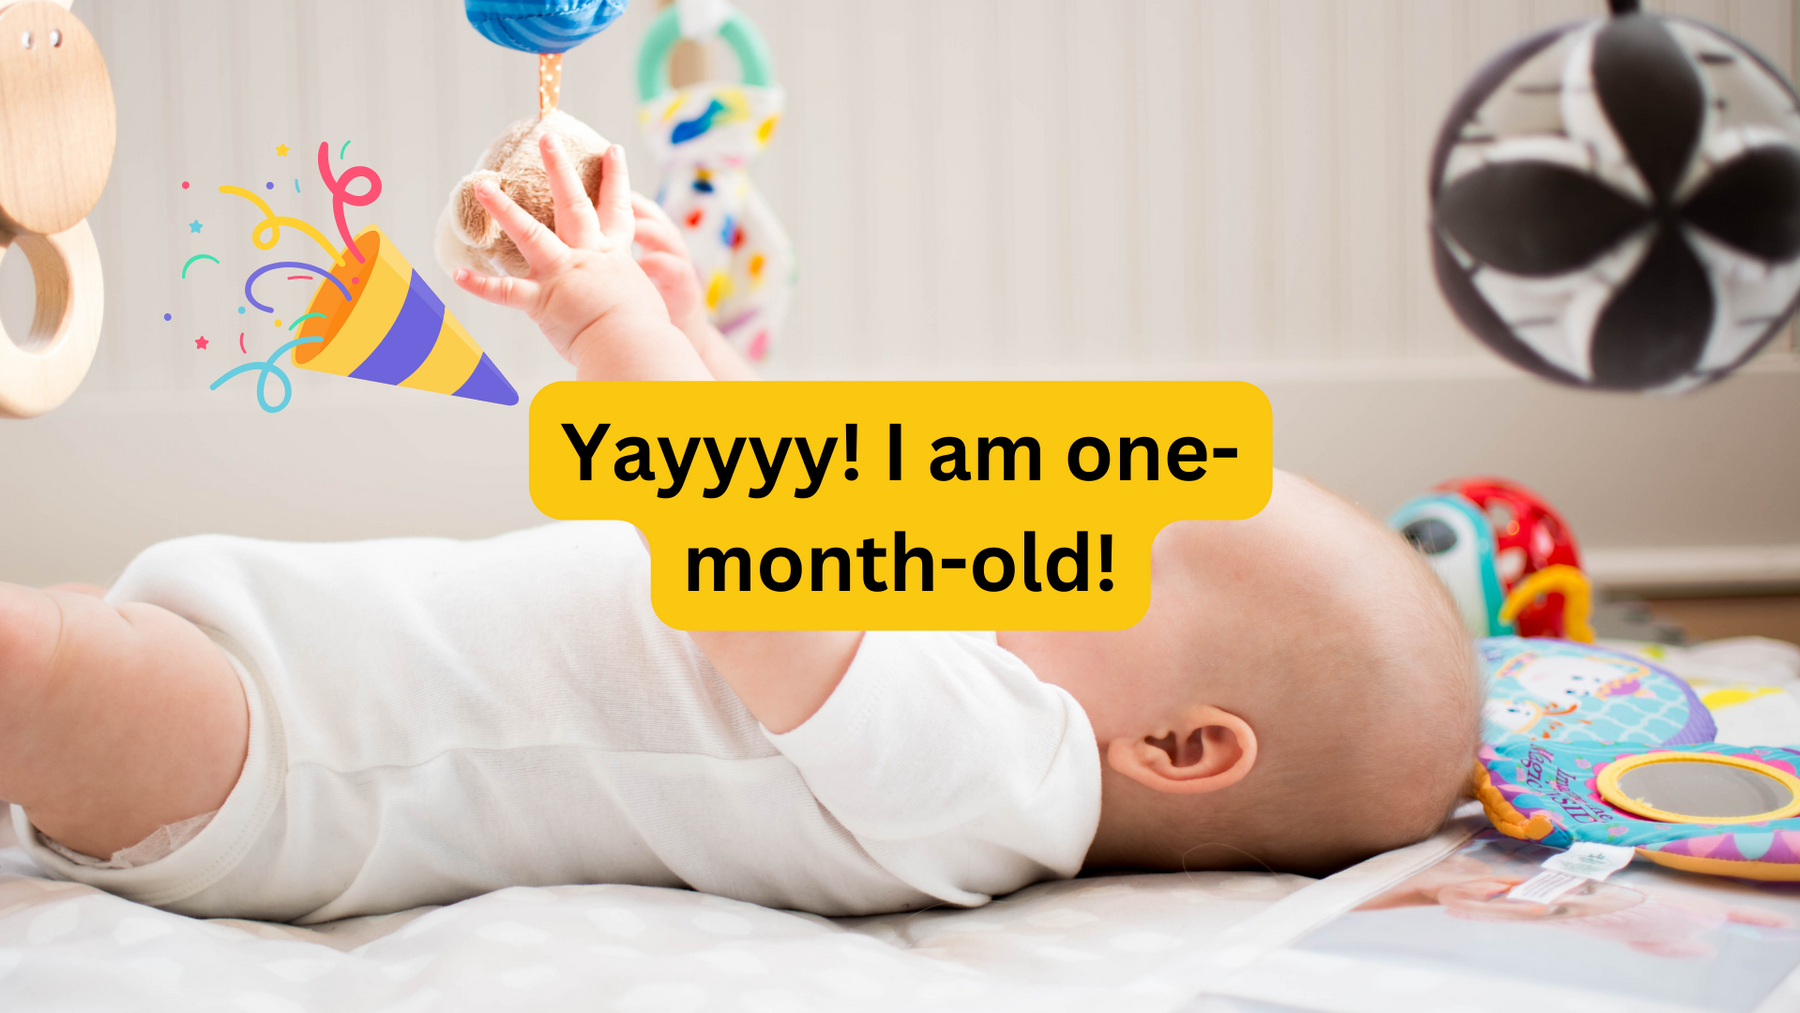 What You Need To Know About Your One-Month-Old